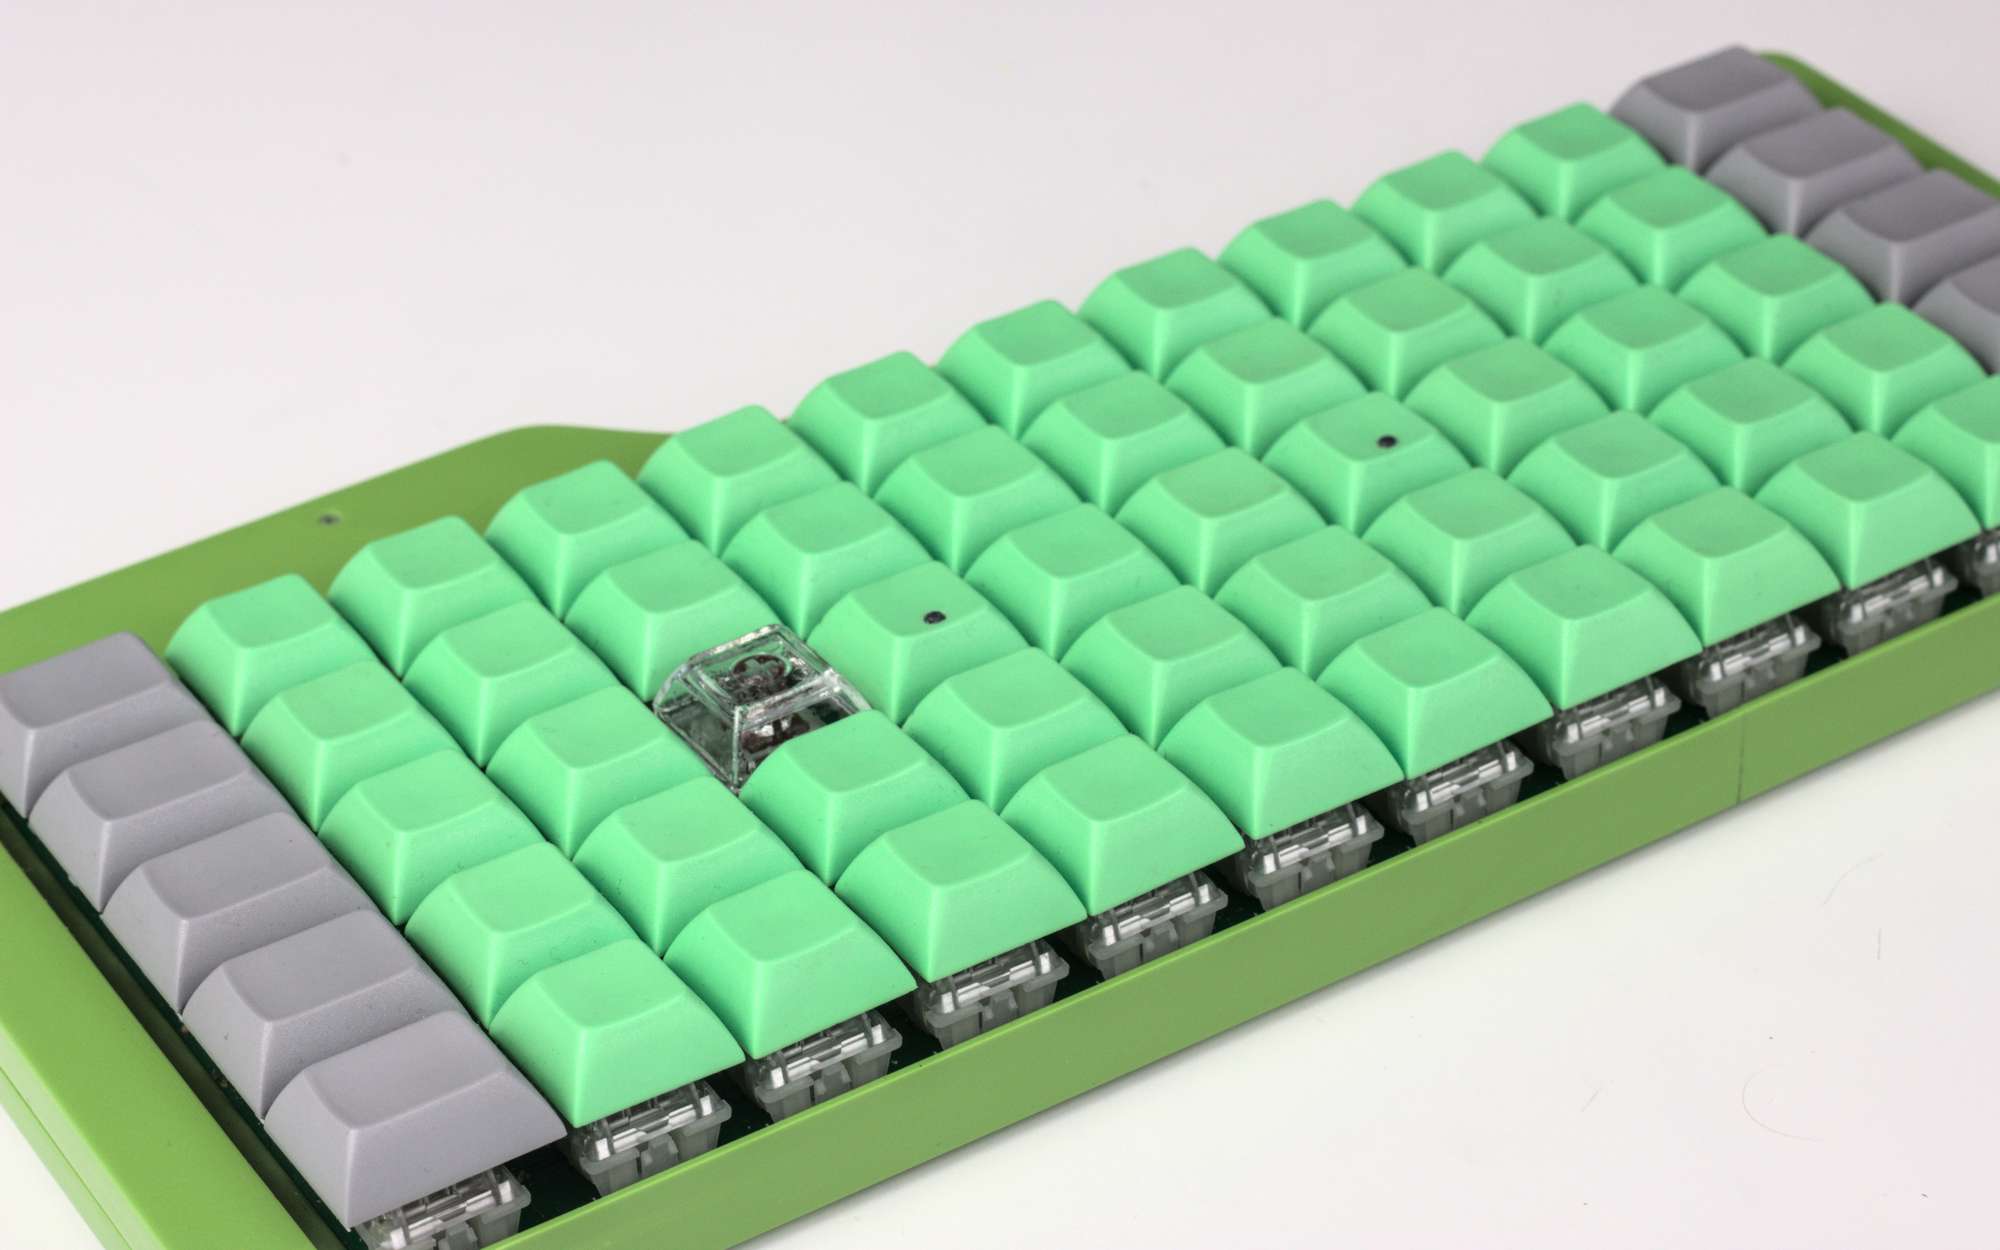 Clear polyester keycap in a sea of green ones